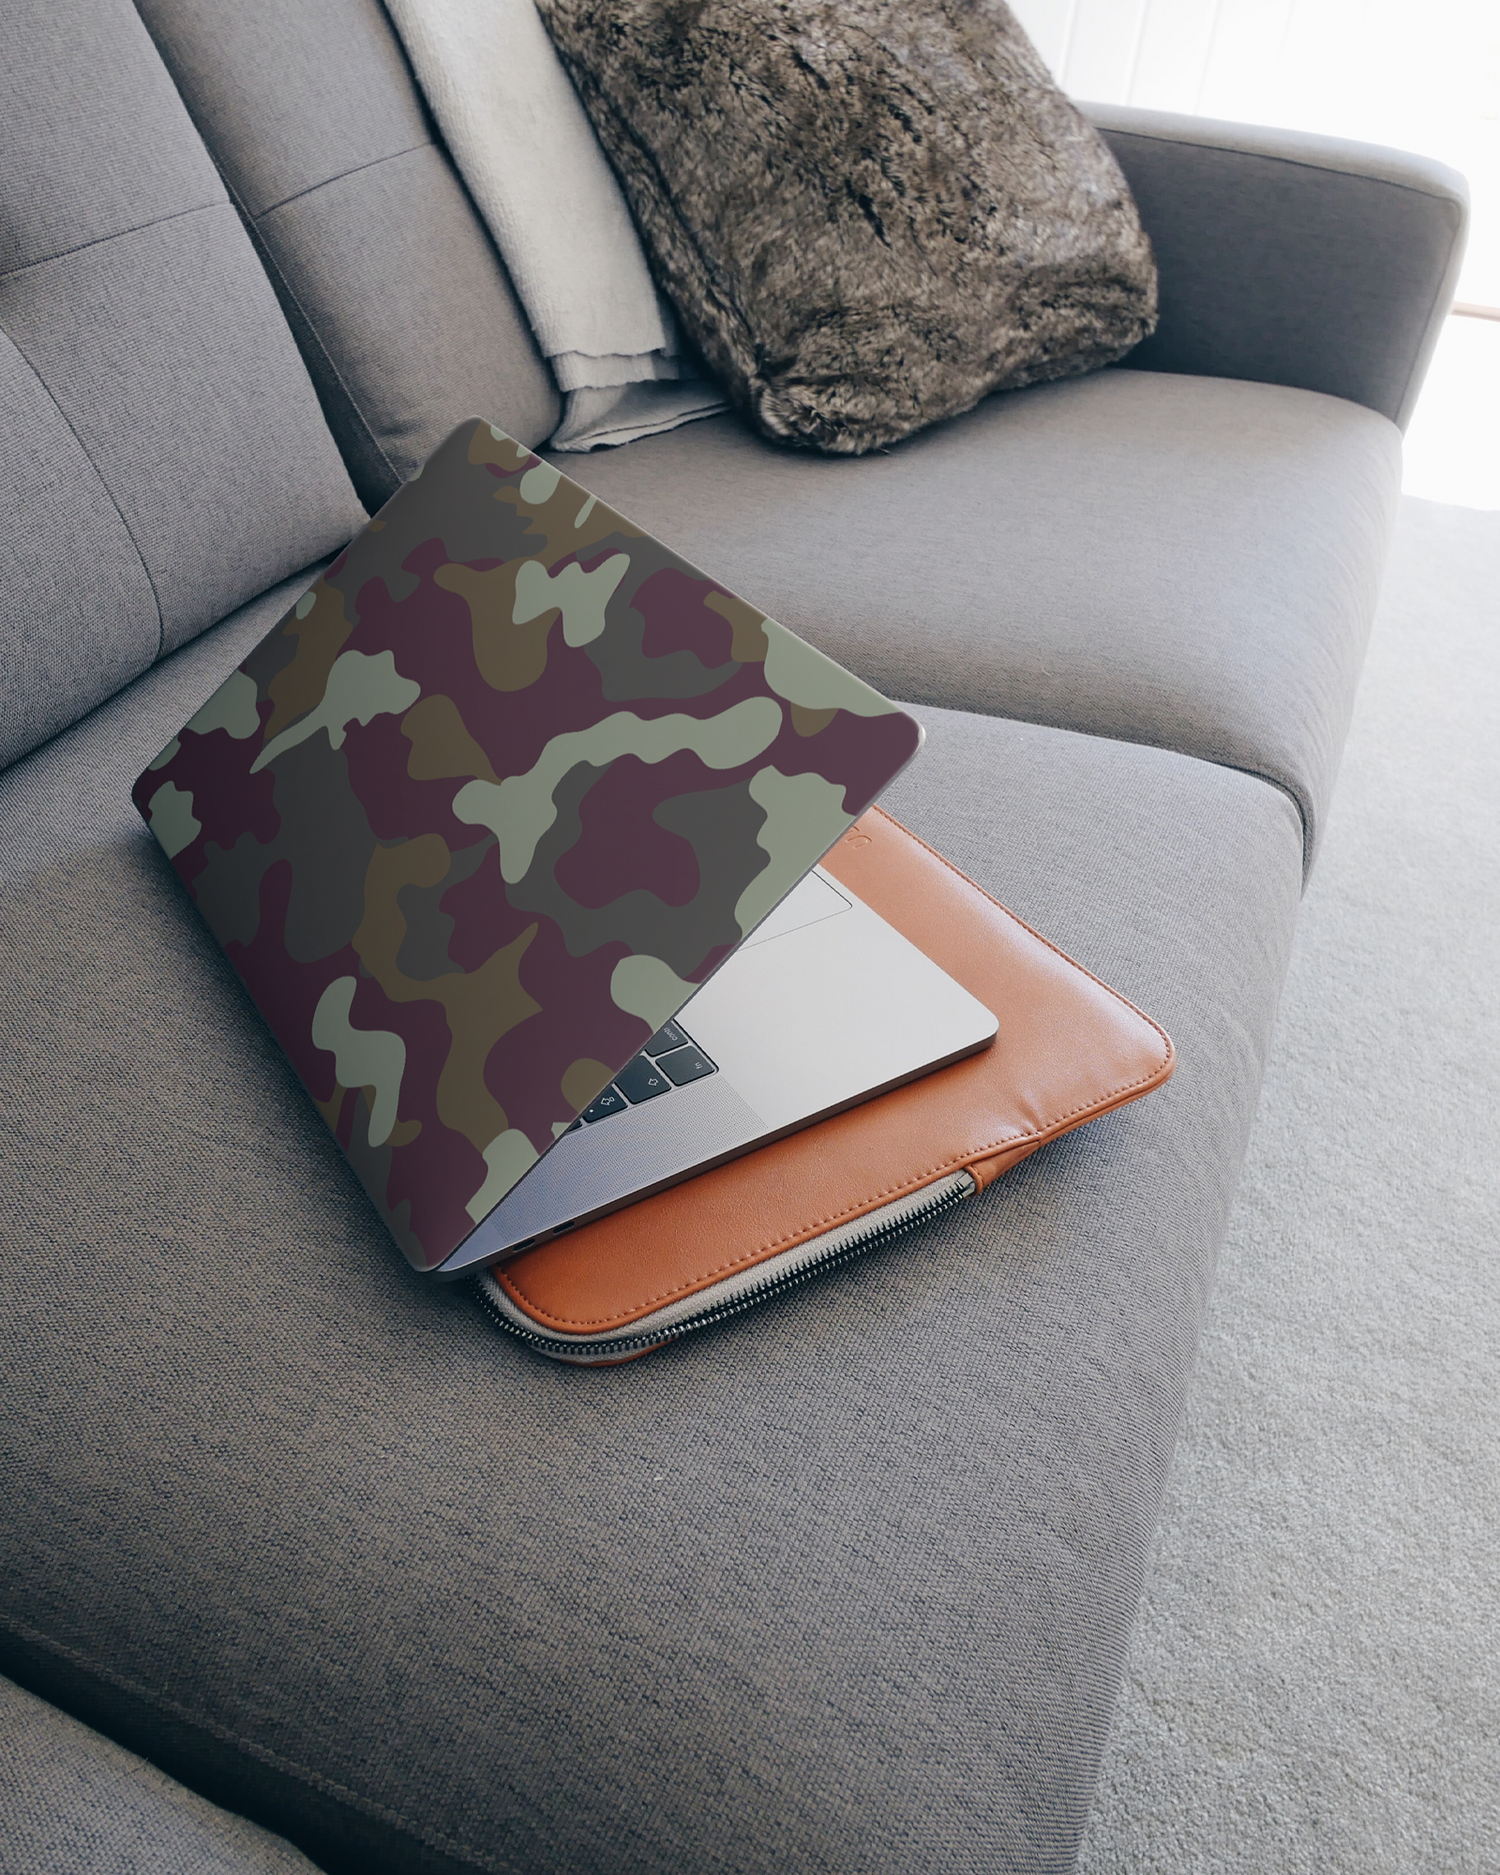 Night Camo Laptop Skin for 15 inch Apple MacBooks on a couch